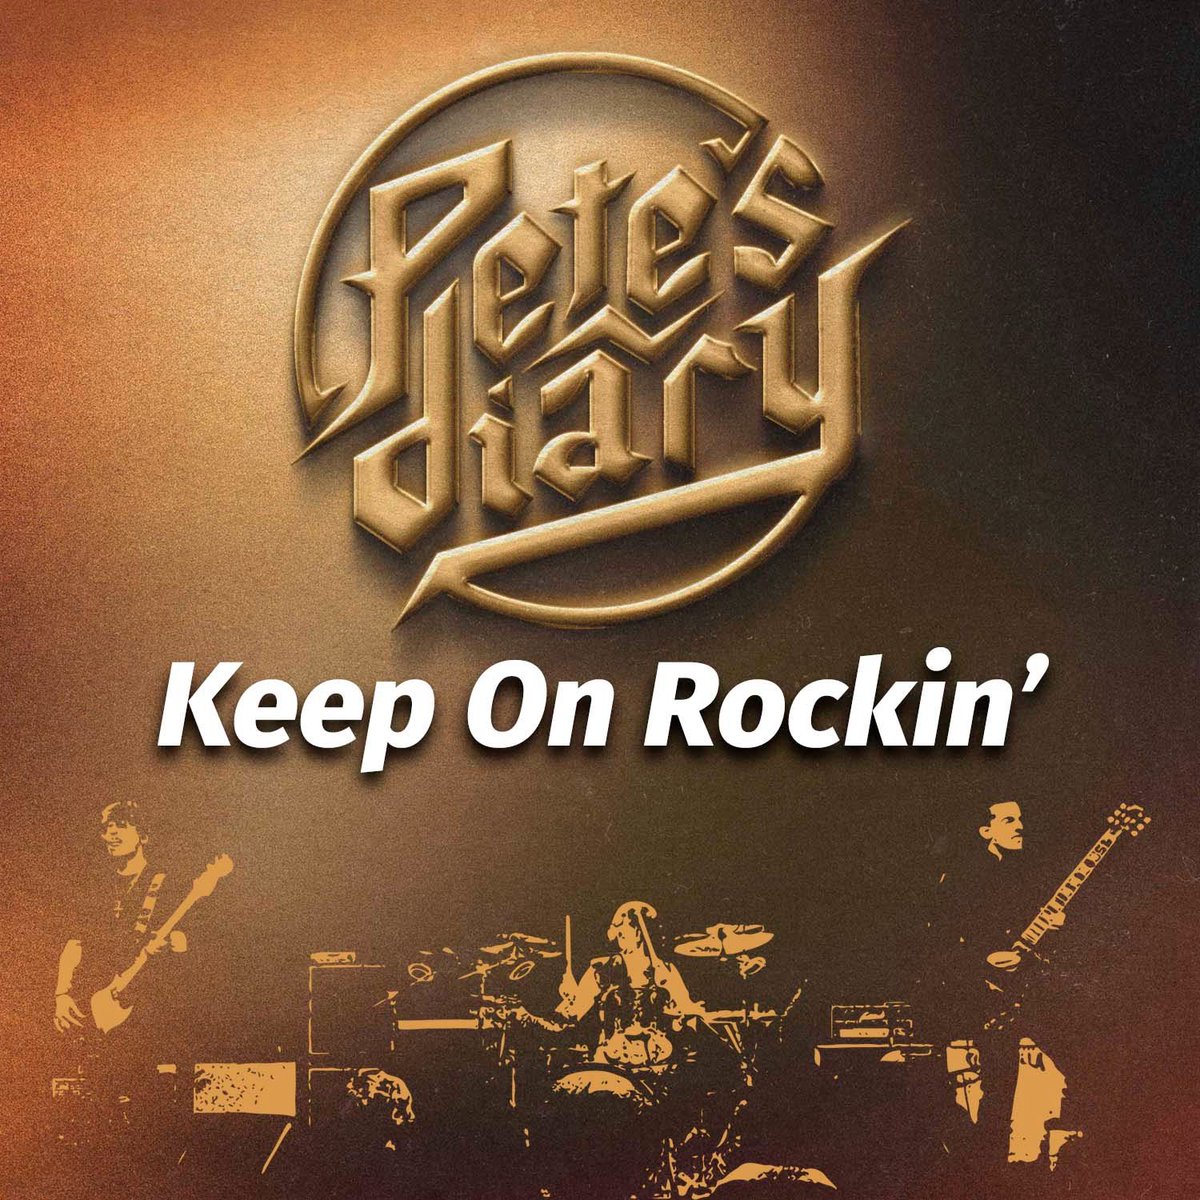 Keep On Rockin’ single by #PetesDiary is now available wherever you stream music!!! Spotify open.spotify.com/album/5seKFG4Z… Apple music.apple.com/us/album/keep-… YouTube music.youtube.com/playlist?list=… @petedank 🎸 #newrock #nwocr @NCRinNA @PlanetRockRadio @ClassicRockMag @ShannyMarie10…